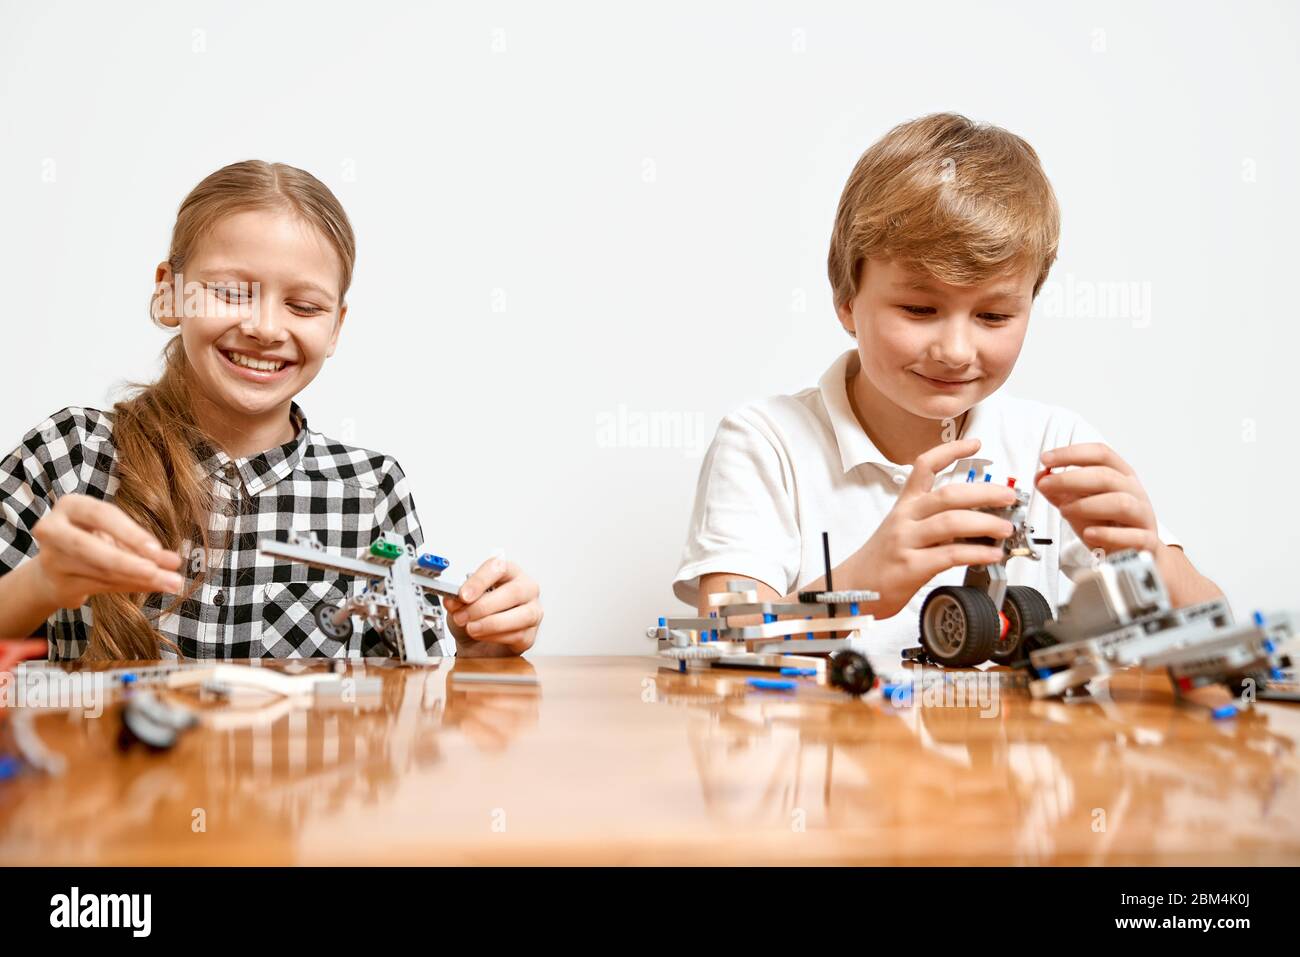 Interesting building kit for kids on table. Close up of boy and girl having fun at table, creating vehicles. Science engineering. Young friends laughing, chatting and working on project together. Stock Photo